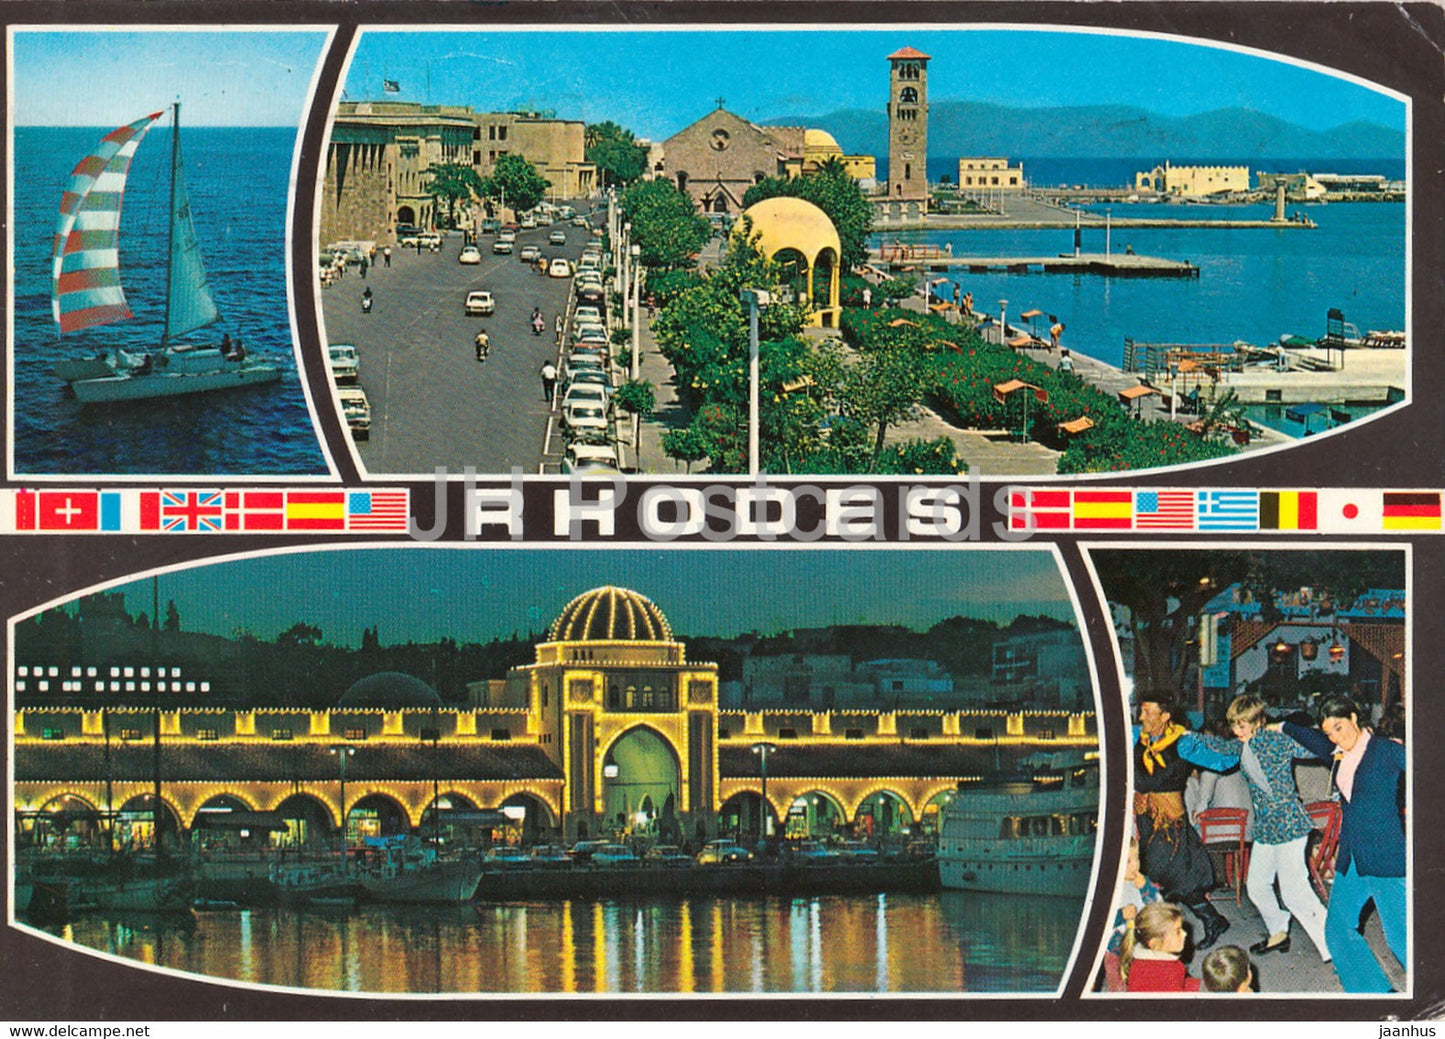 Rhodes - multiview - 1985 - Greece - used - JH Postcards